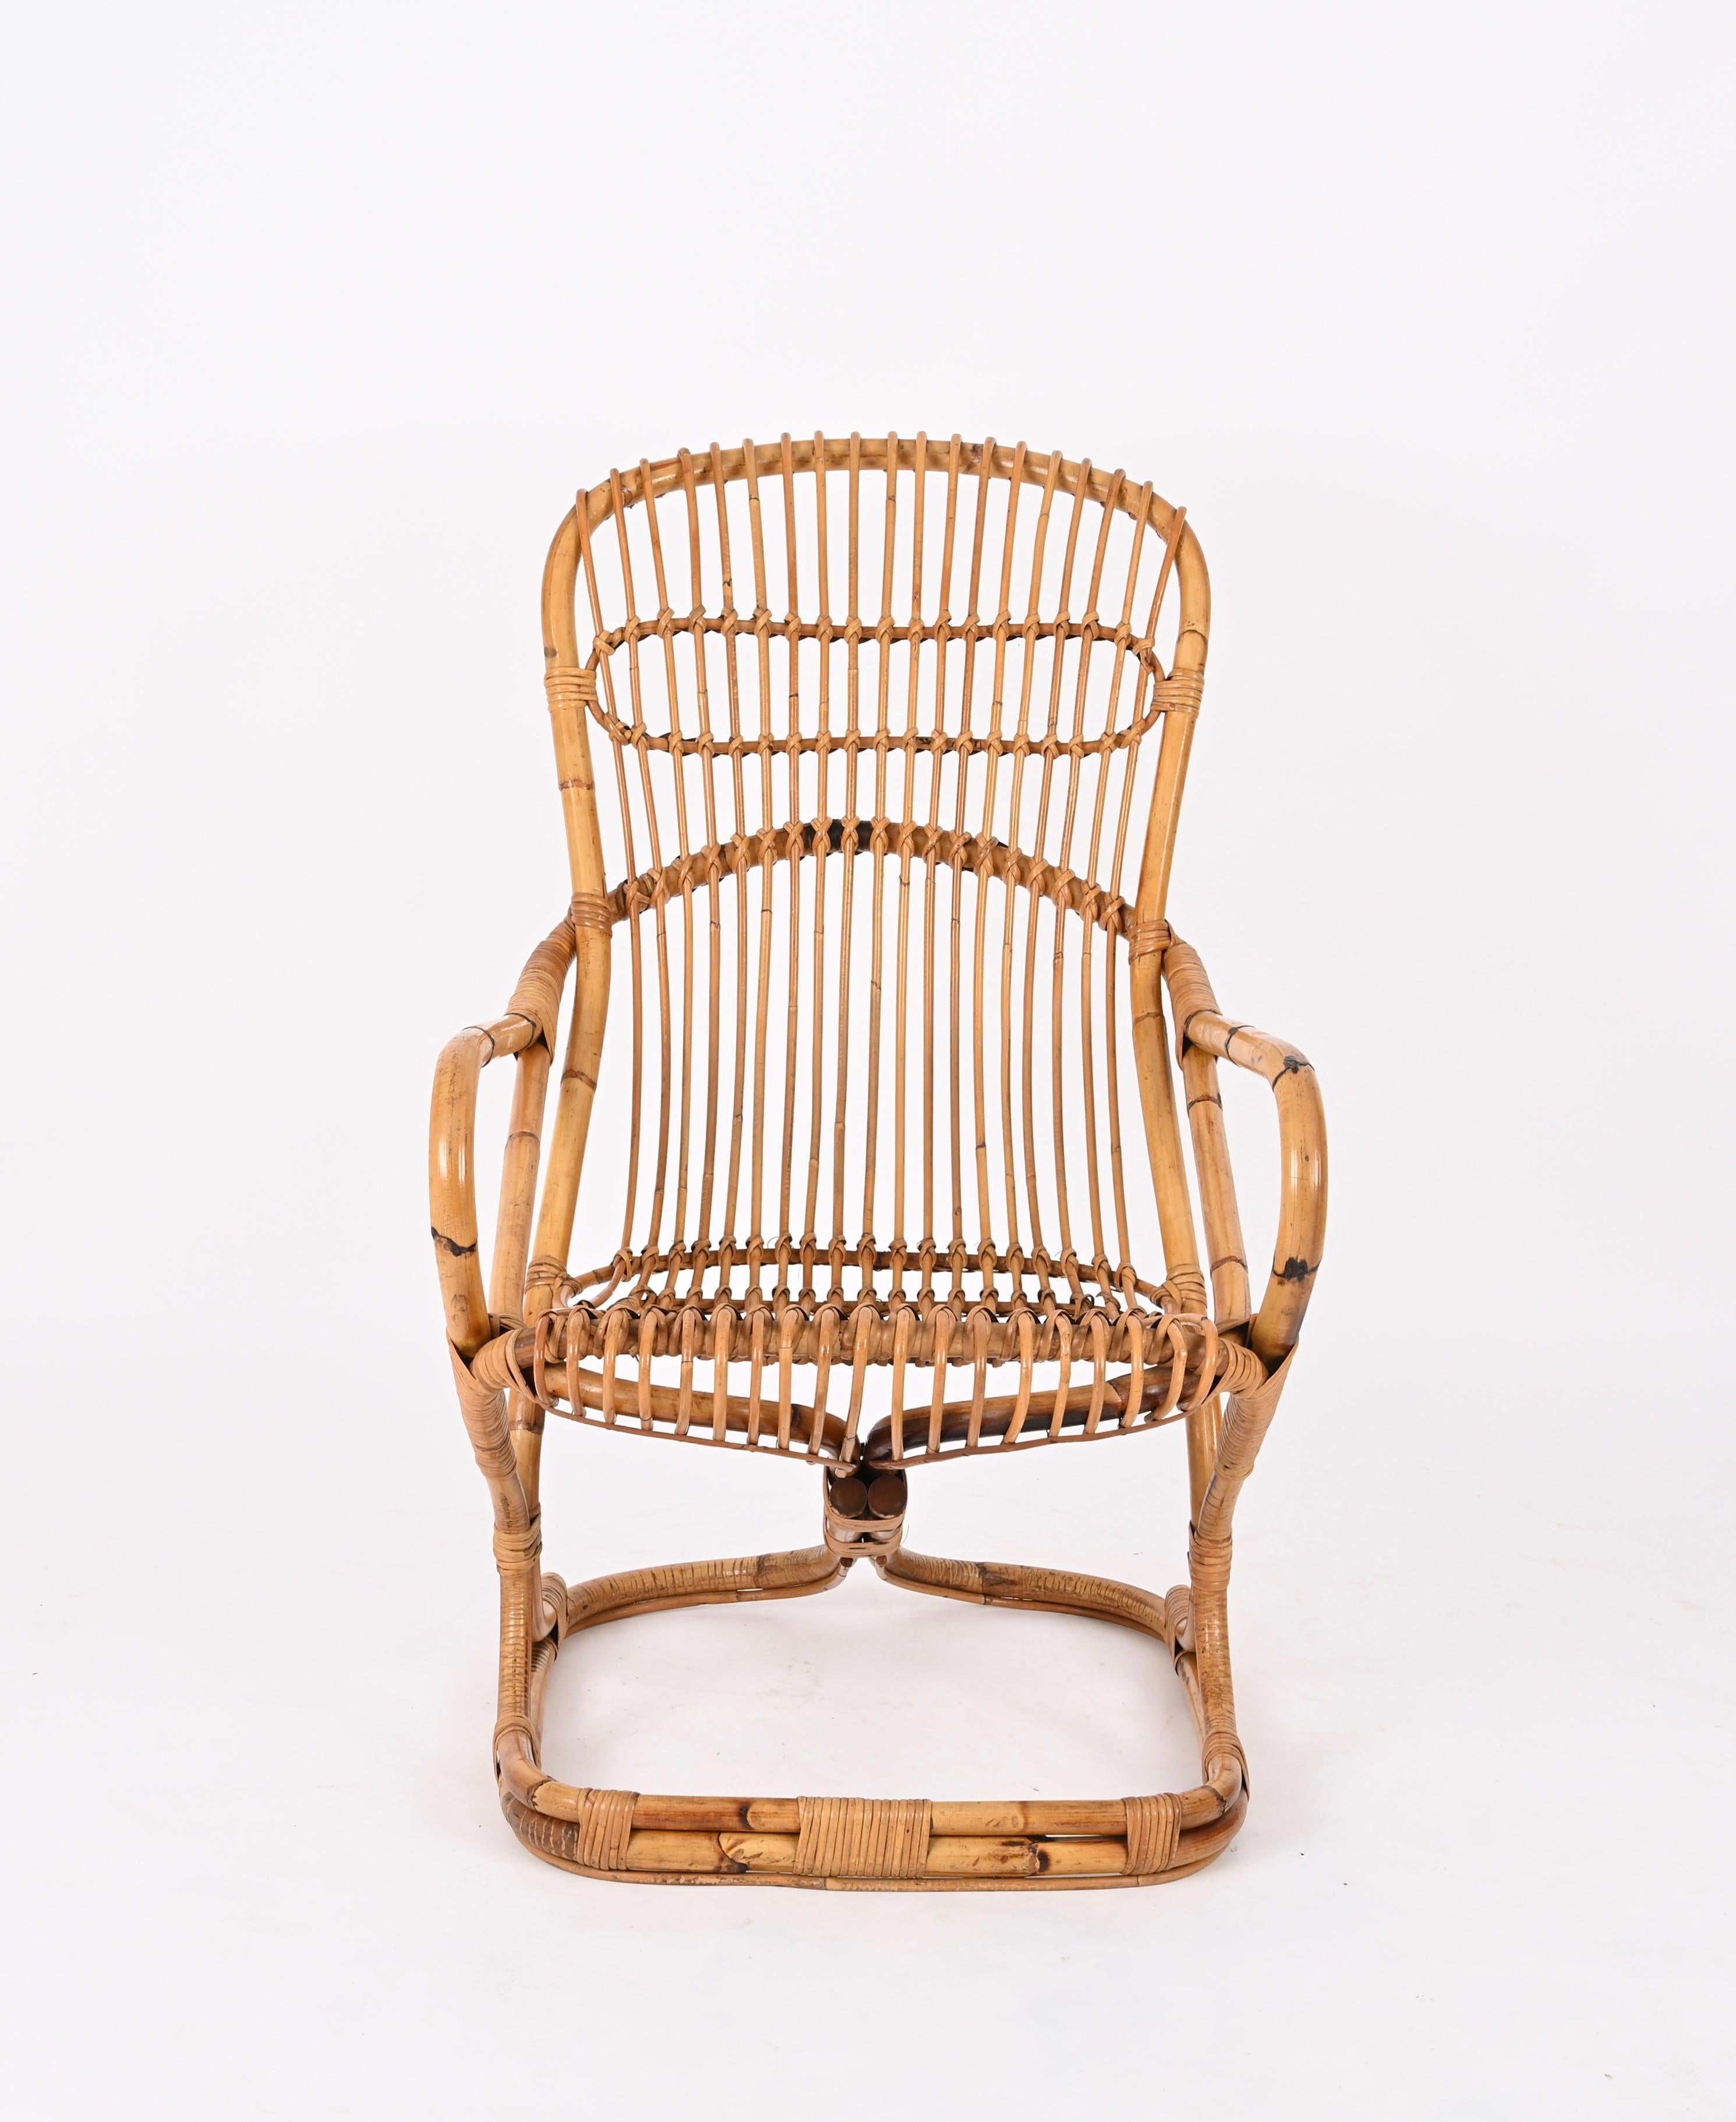 Pair of Midcentury Italian Wicker and Rattan Armchairs by Tito Agnoli, 1960s For Sale 2